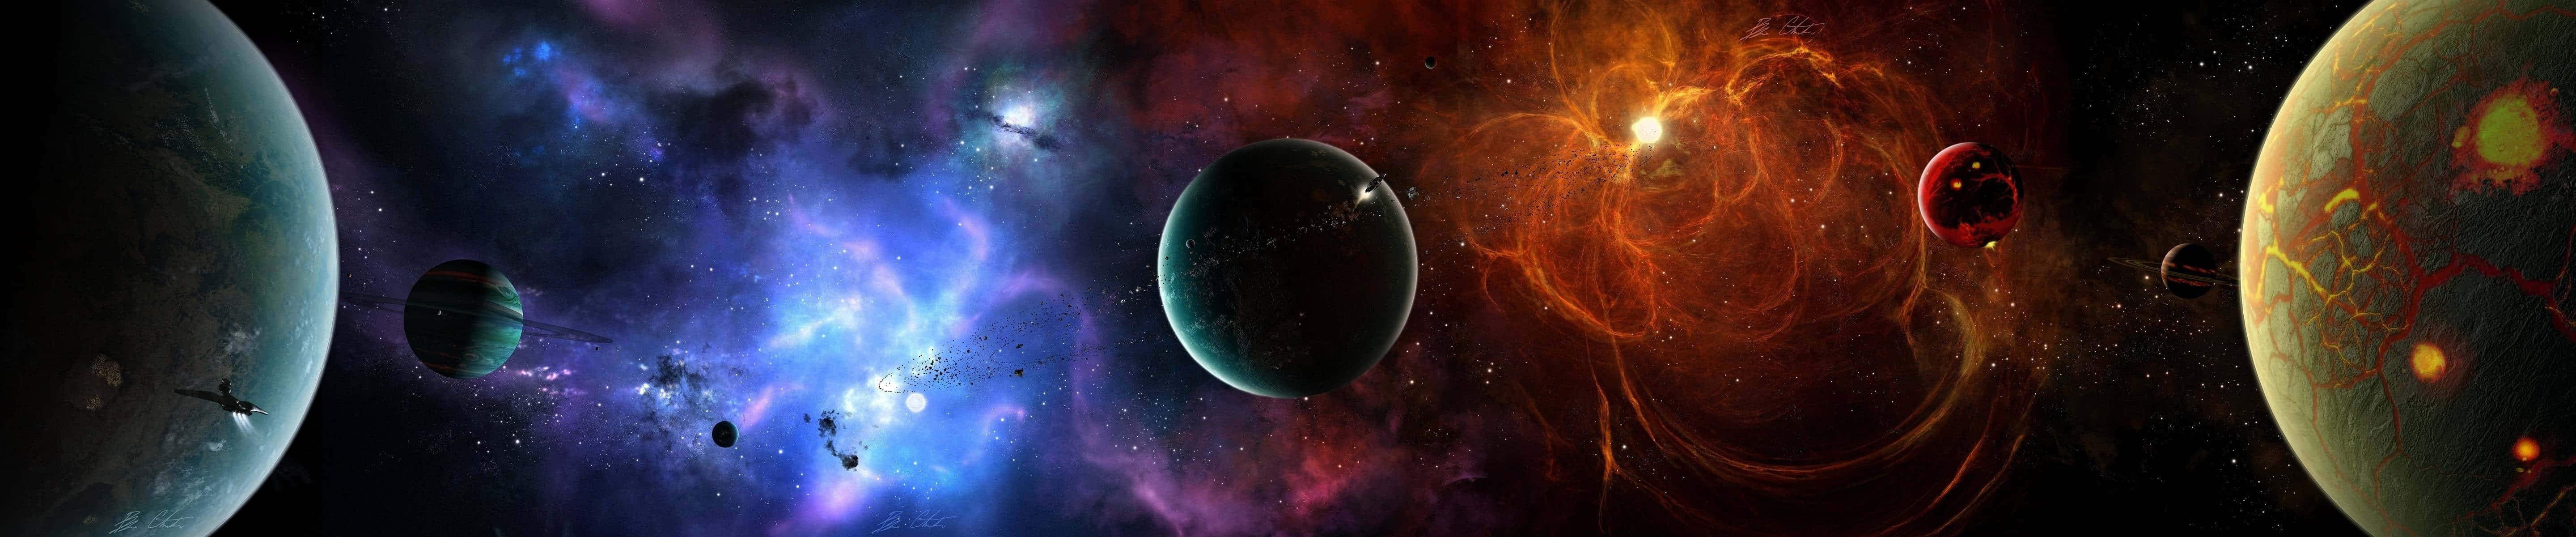 A Space Scene With Many Planets And Stars Wallpaper